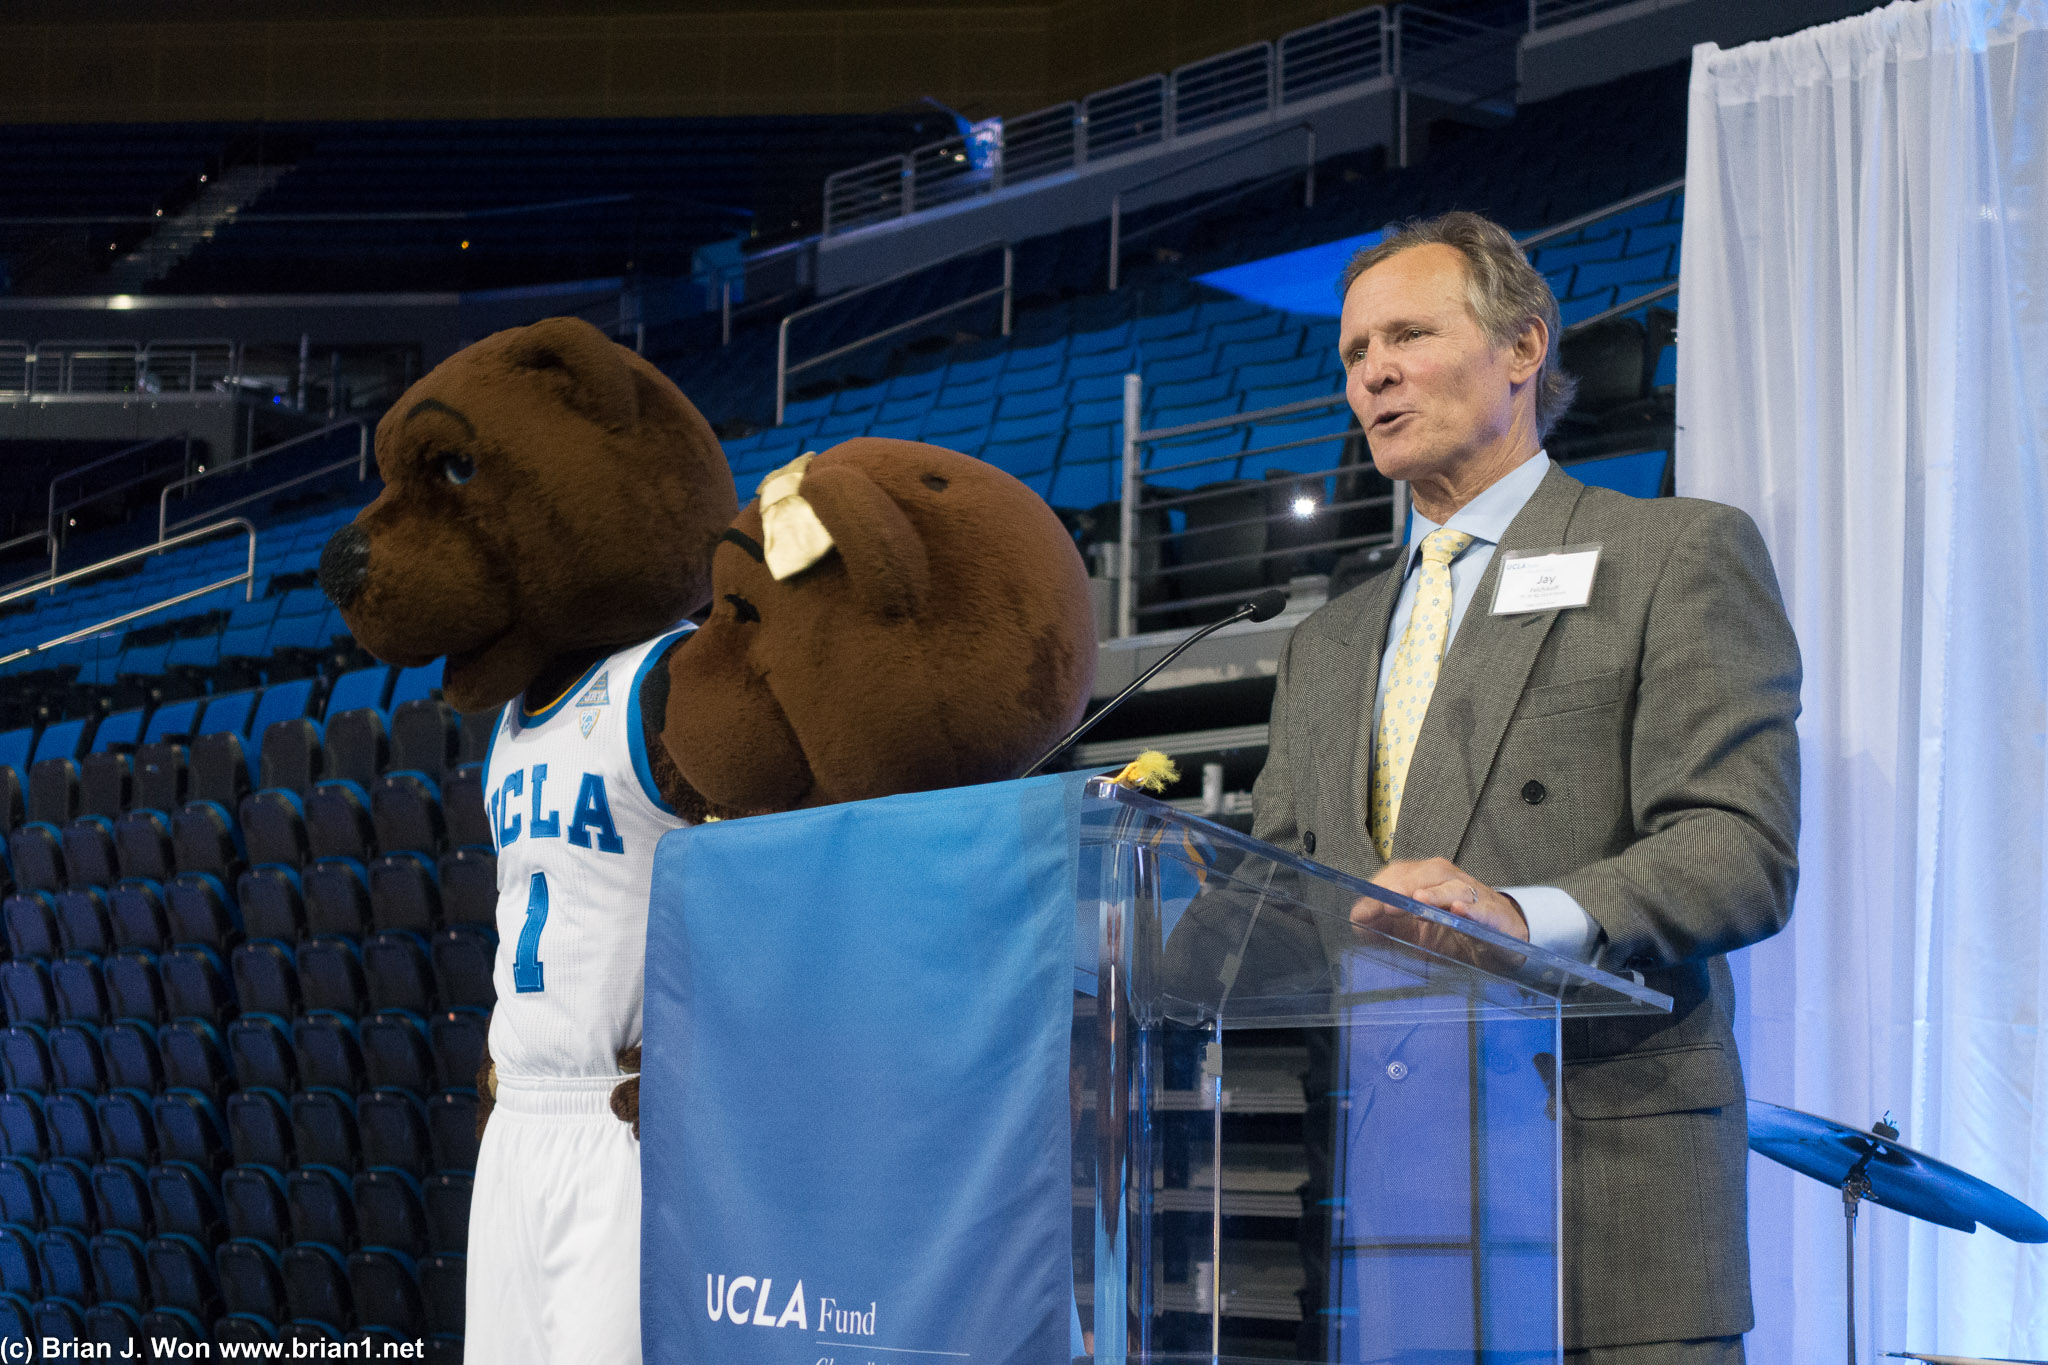 Chair of the UCLA Fund, Jay Palchikoff.